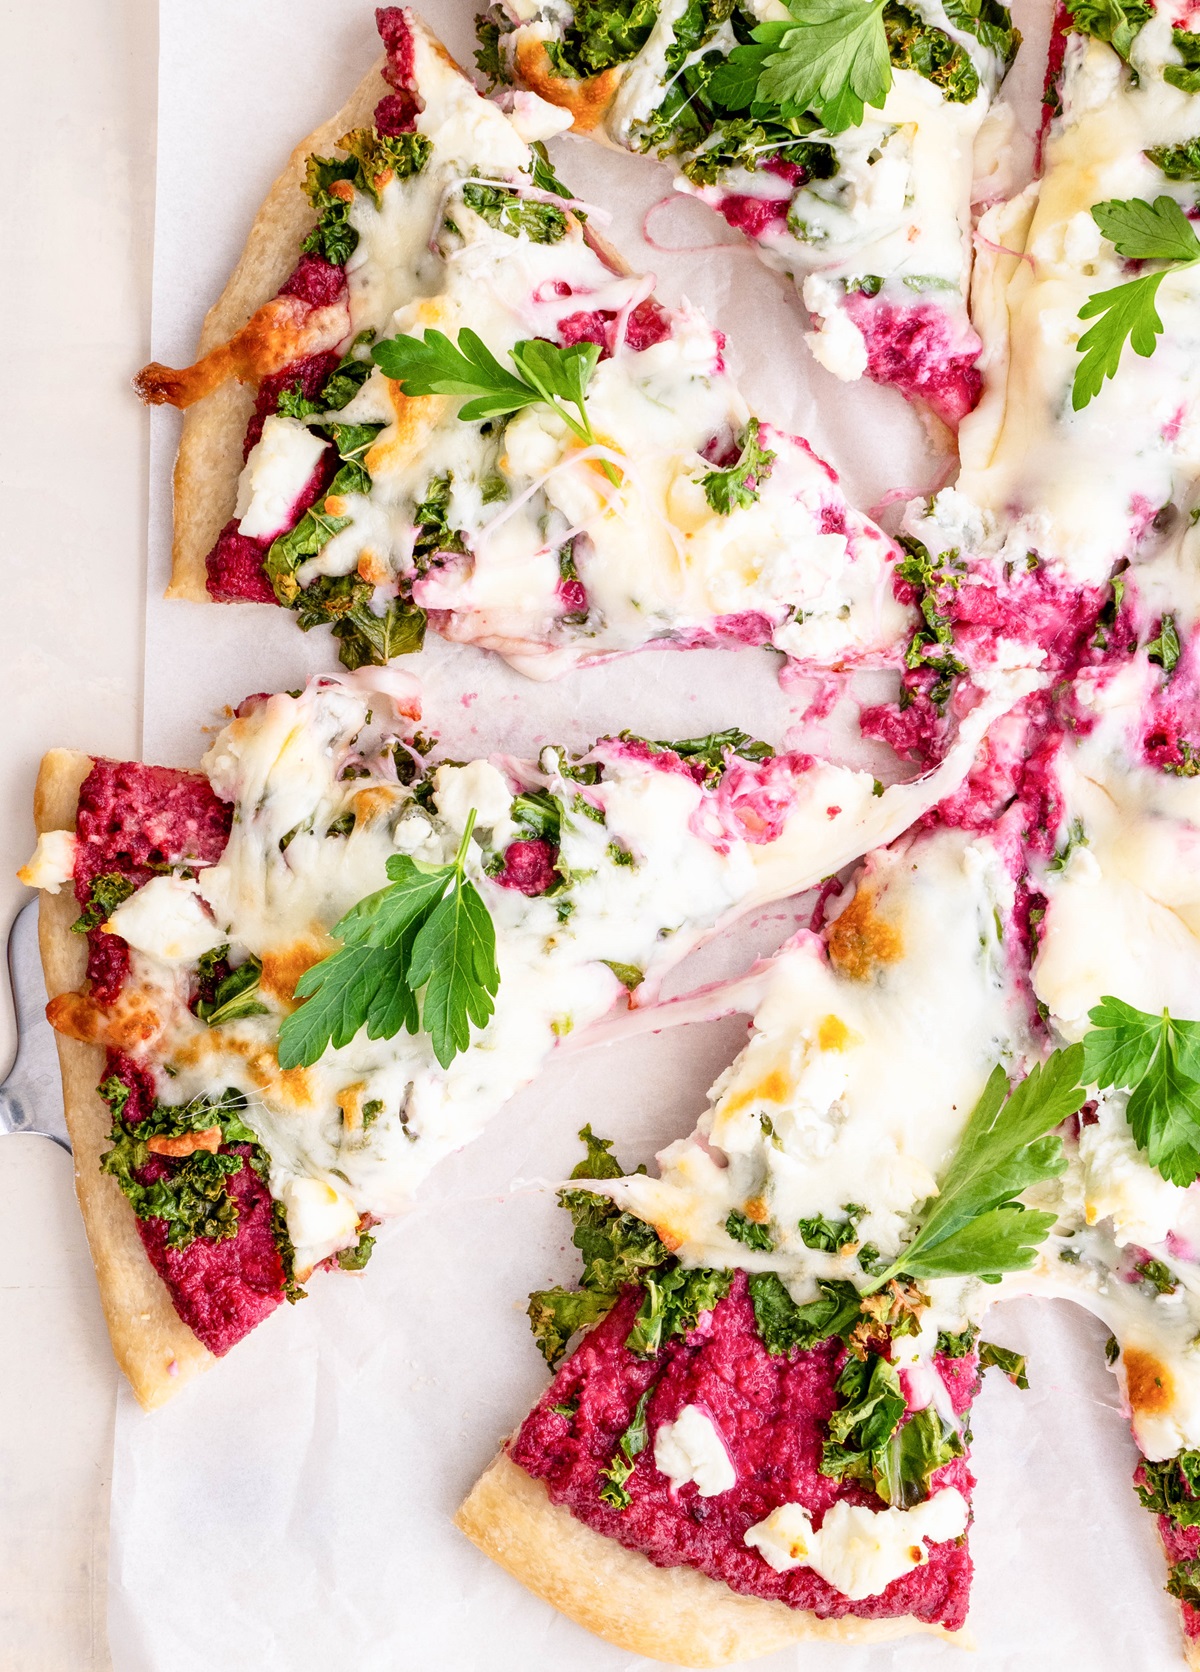 Pizza cut into slices on a sheet of parchment paper with beet pesto sauce, kale, and goat cheese.